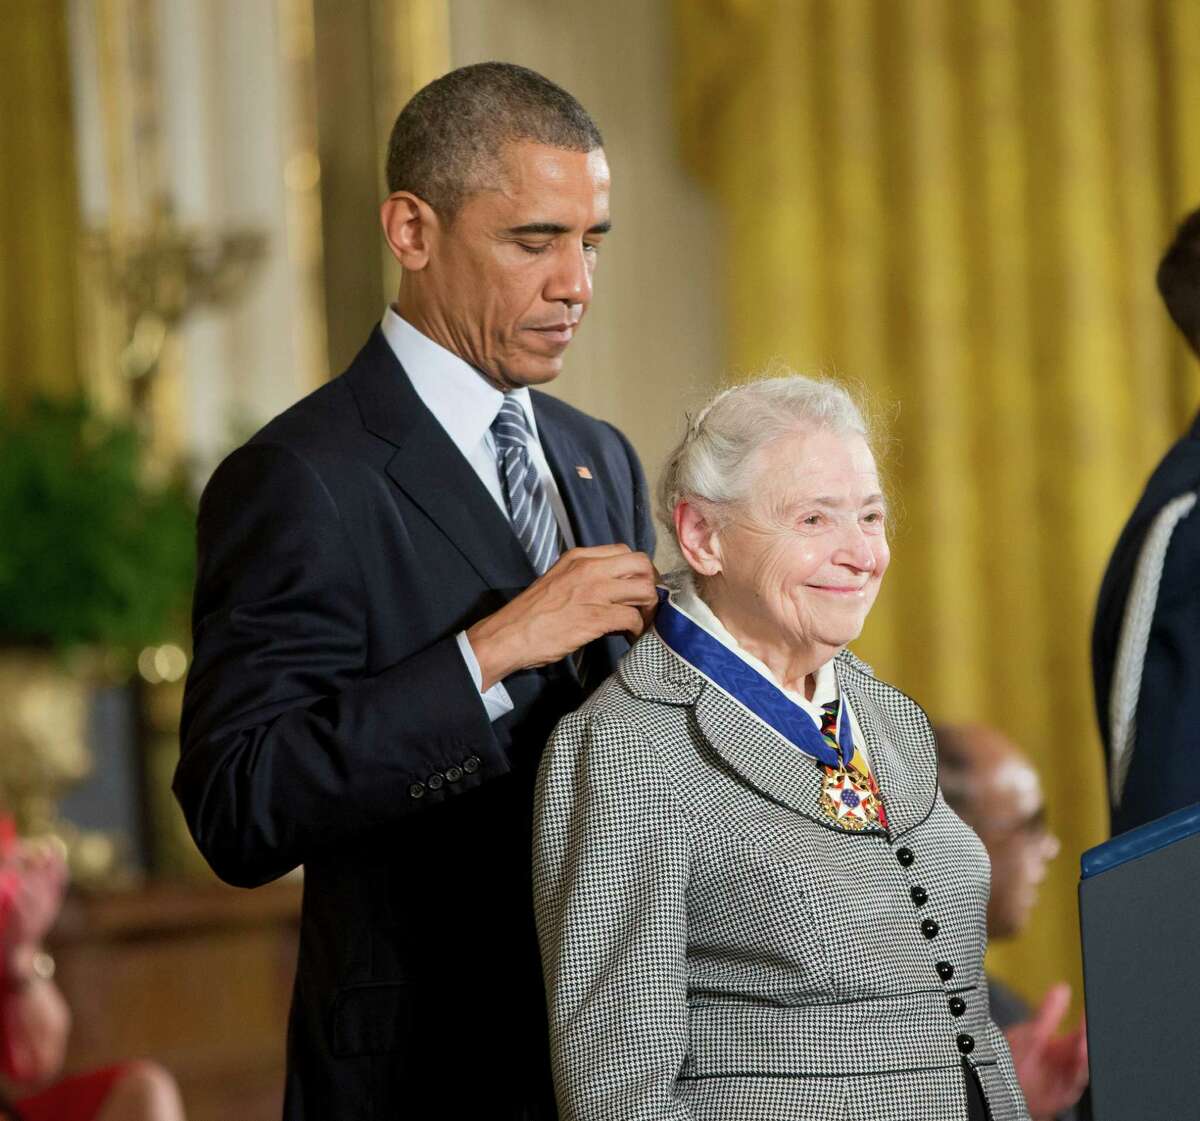 President Barack Obama awards professor, Mildred Dresselhaus, the Presidential Medal of Freedom, Monday, Nov. 24, 2014, during a ceremony in the East Room of the White House in Washington. President Obama is presenting the nation's highest civilian honor to 19 artists, activists, public servants and others. (AP Photo/Pablo Martinez Monsivais)